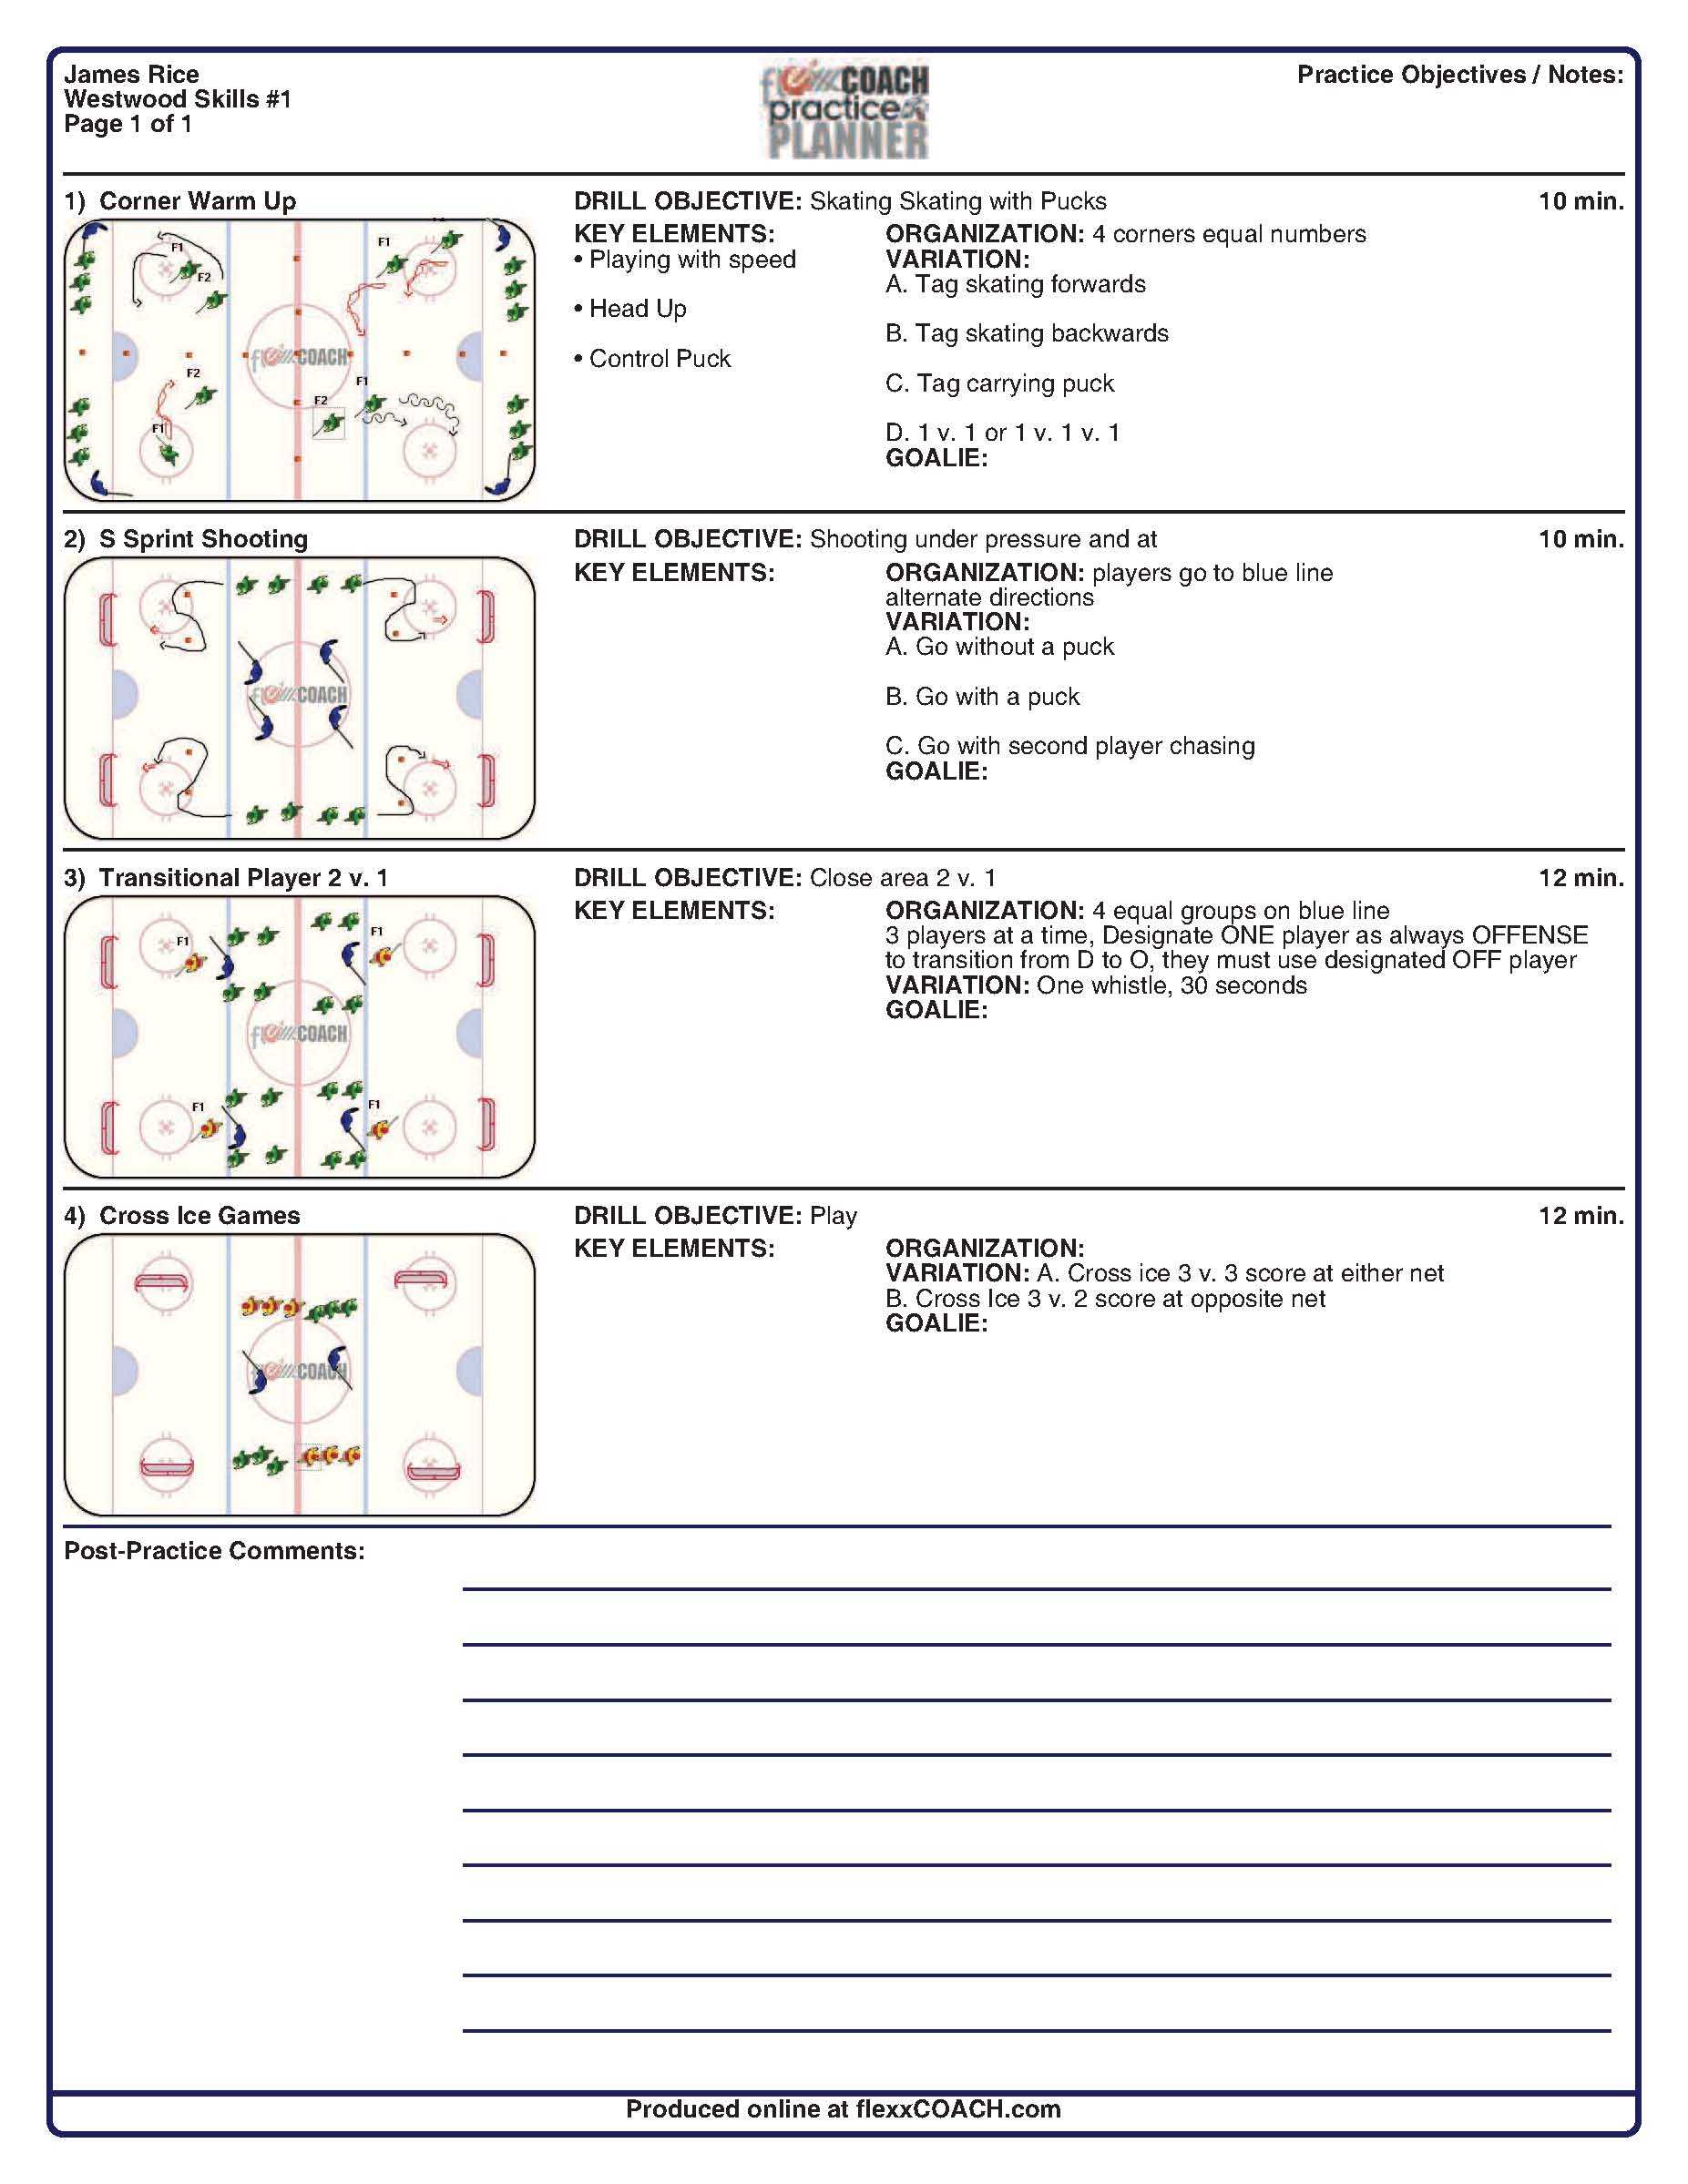 Drill Exchange | Westwood Youth Hockey Throughout Blank Hockey Practice Plan Template